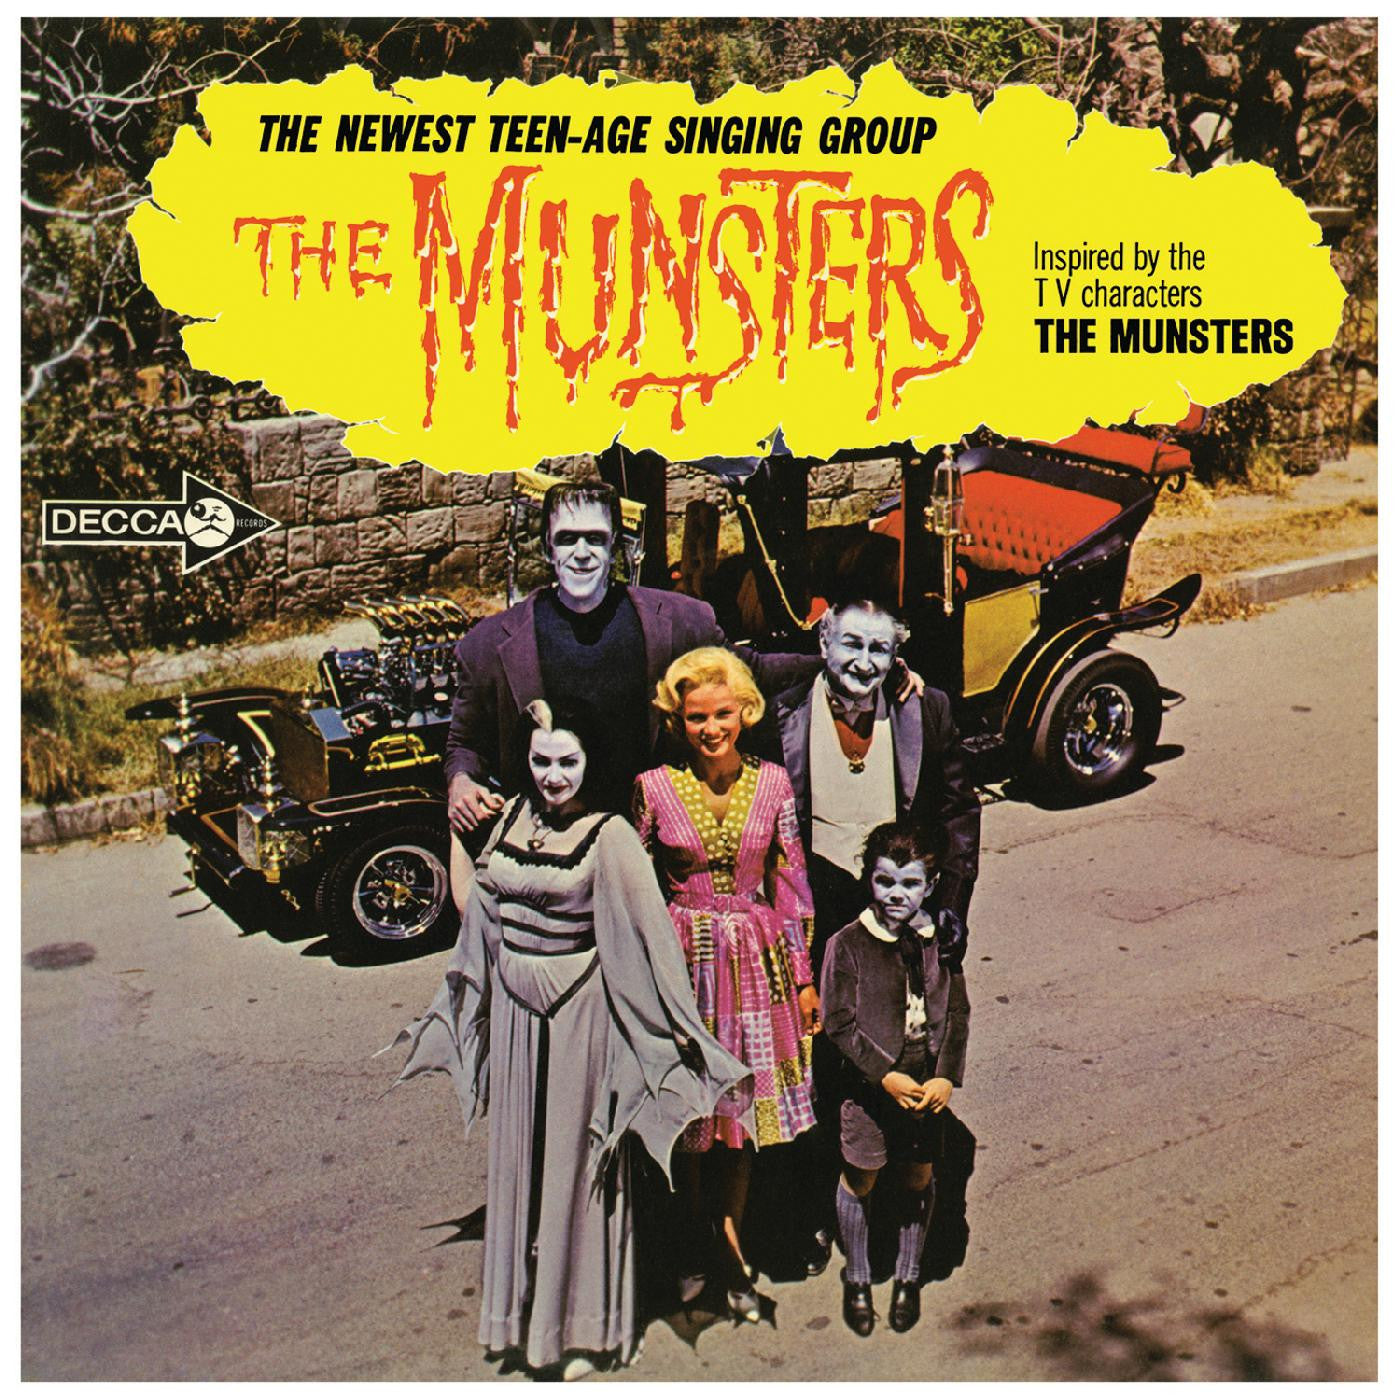 THE MUNSTERS - THE MUNSTERS Vinyl LP